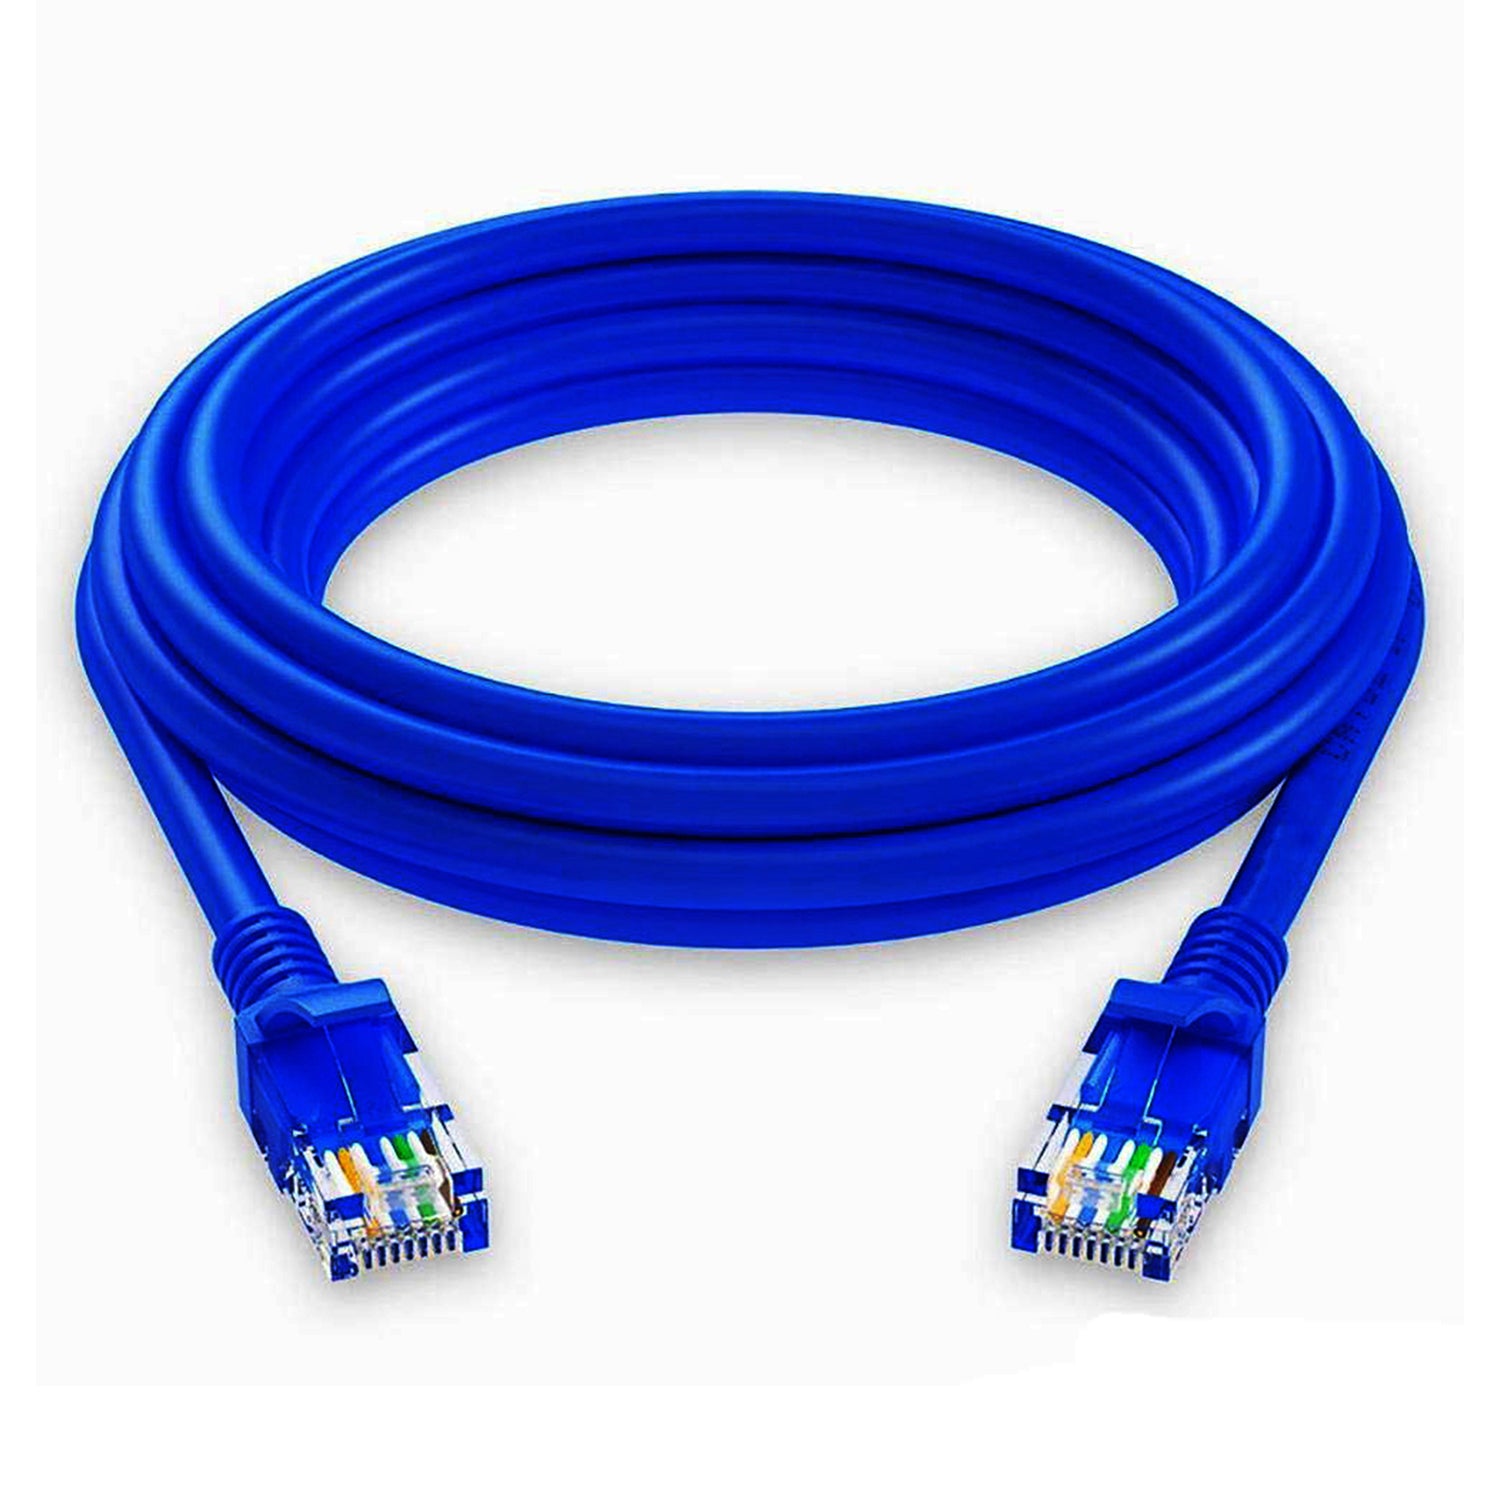 5 Core Cat 6 Ethernet Cable 6ft 10Gbps Network Patch Cord High Speed LAN Cable